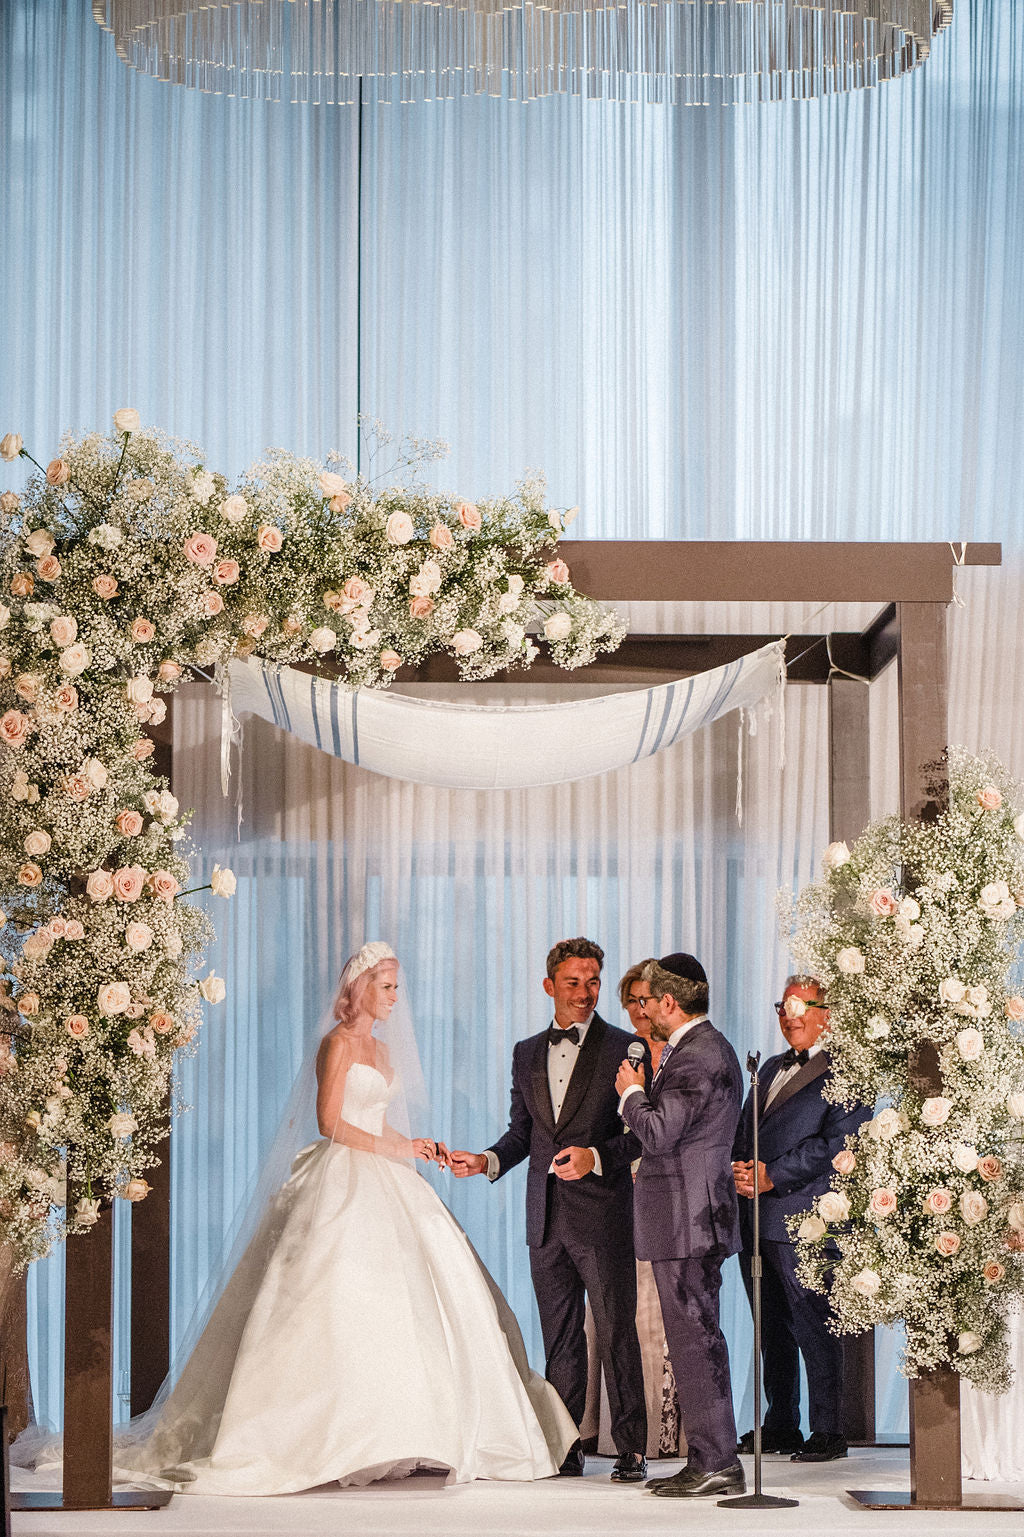 Clouds of Baby's Breath at the Langham Hotel